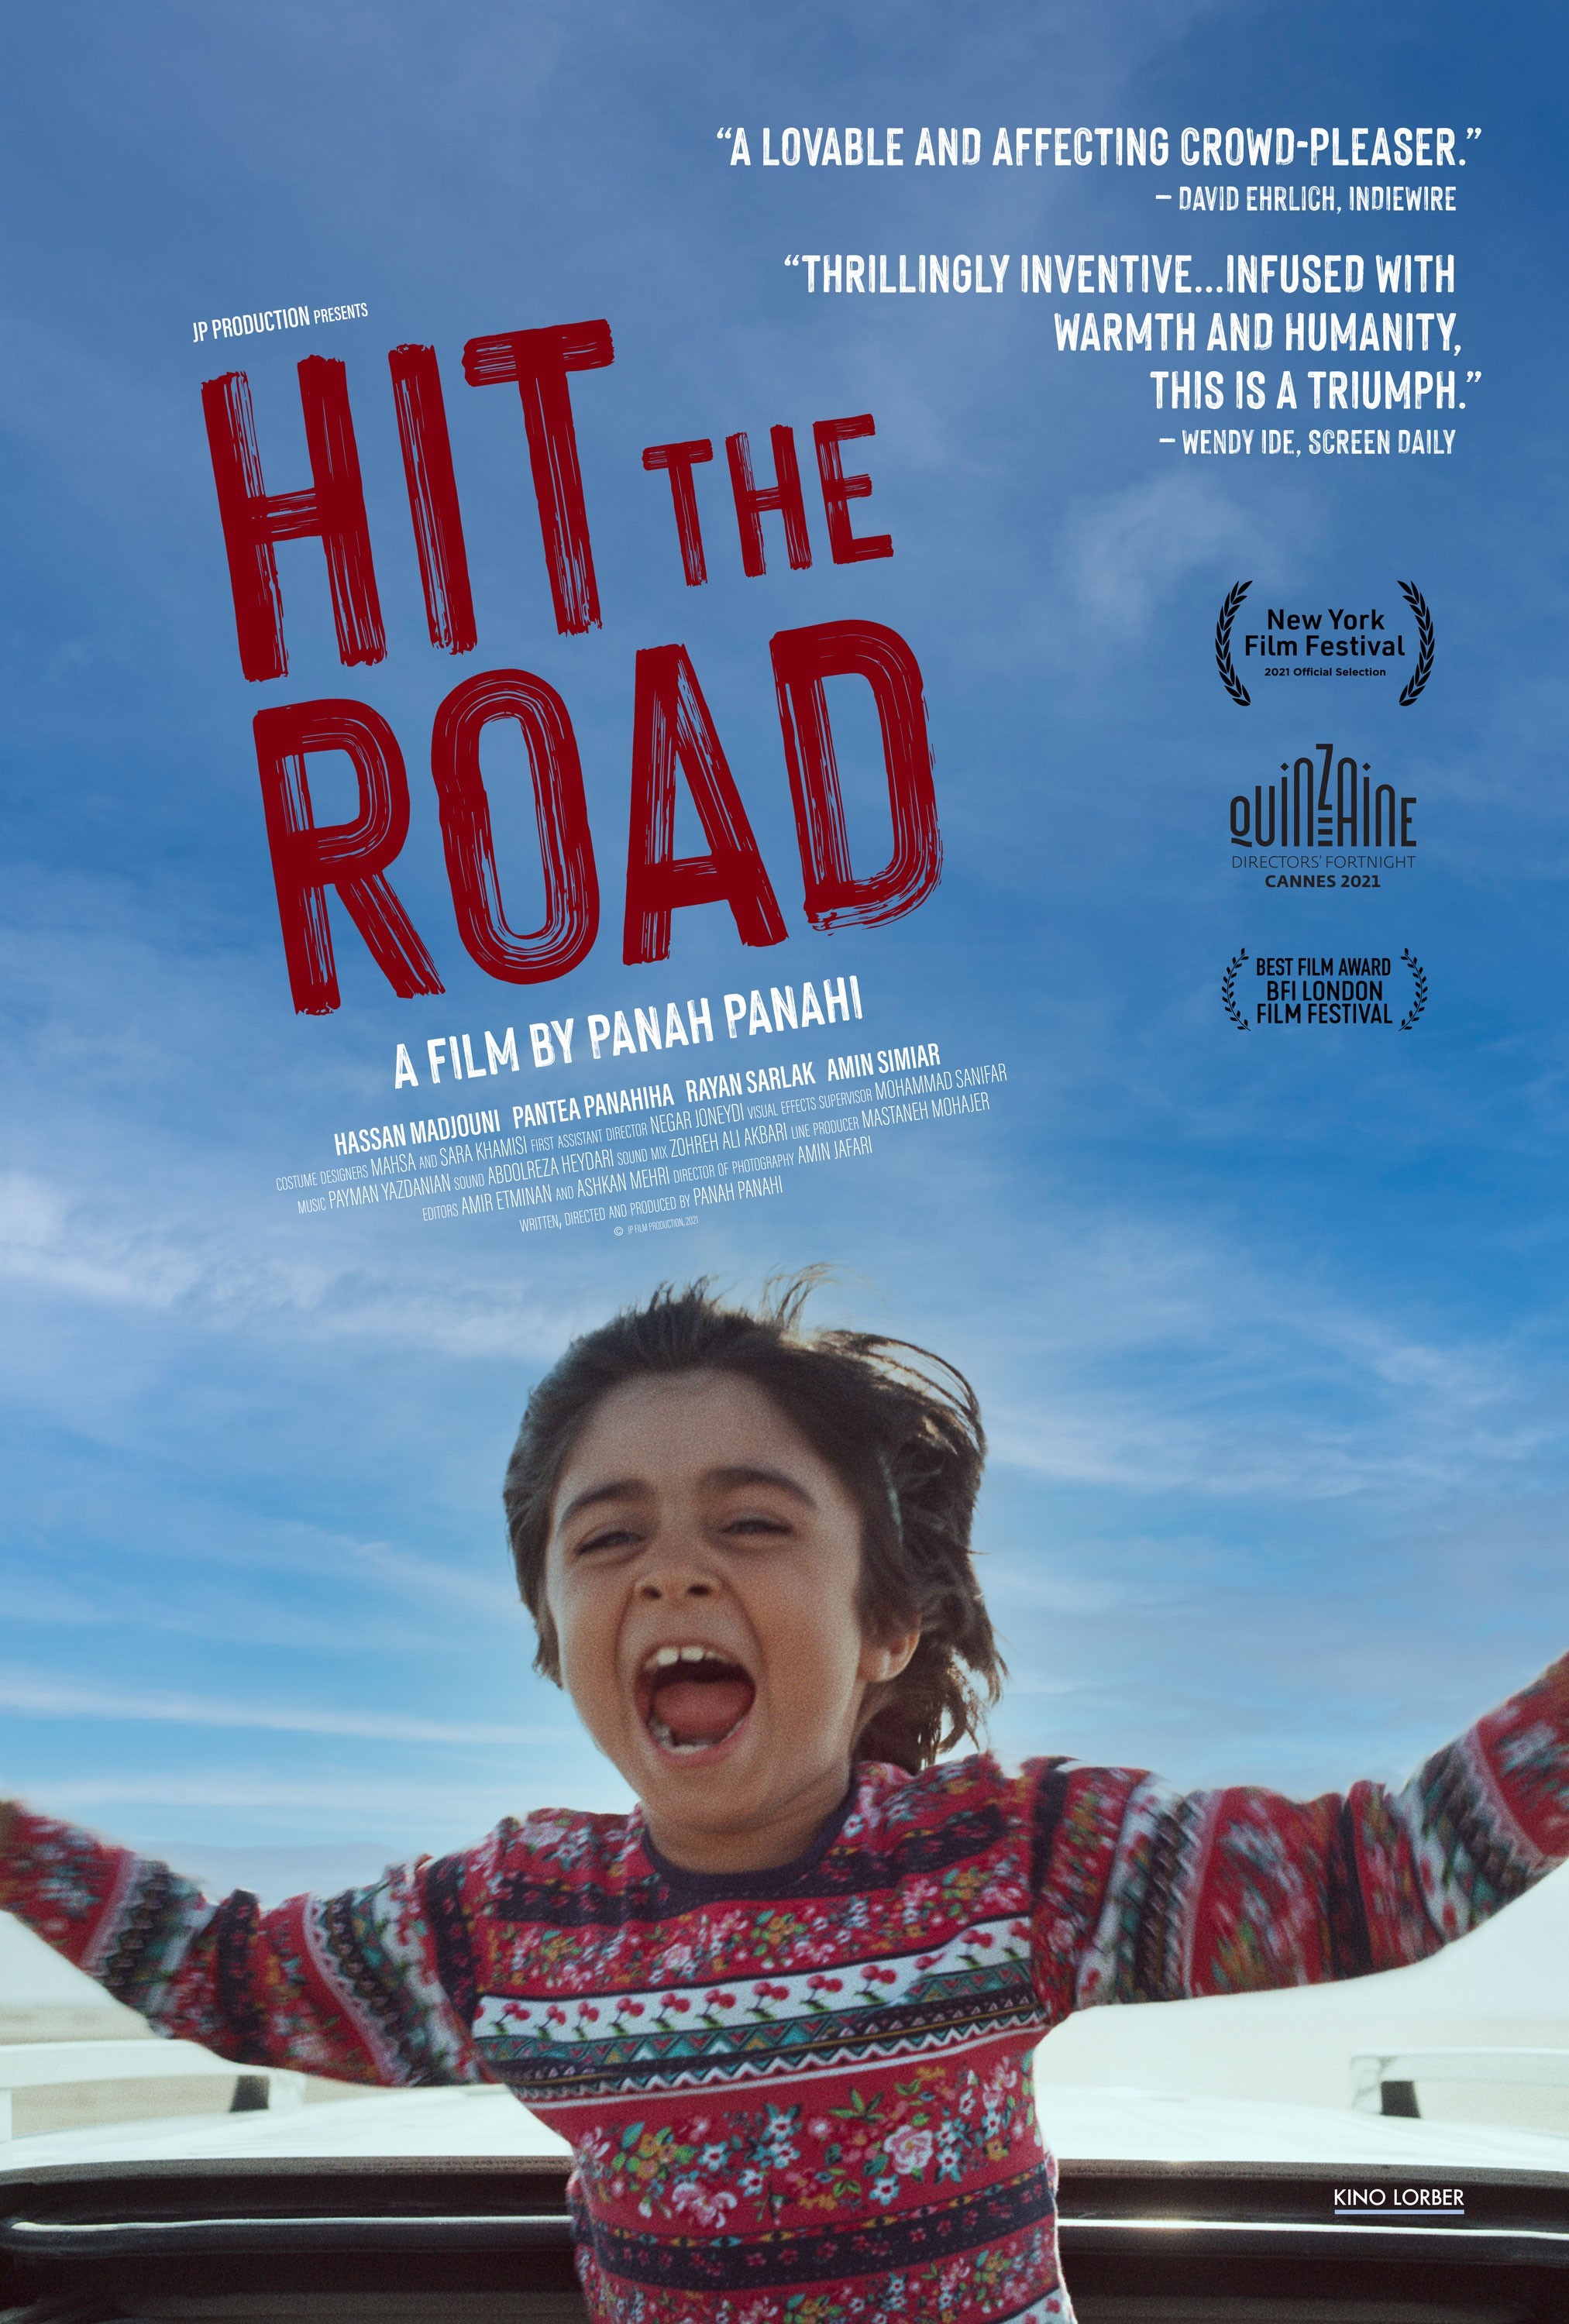 road movie poster